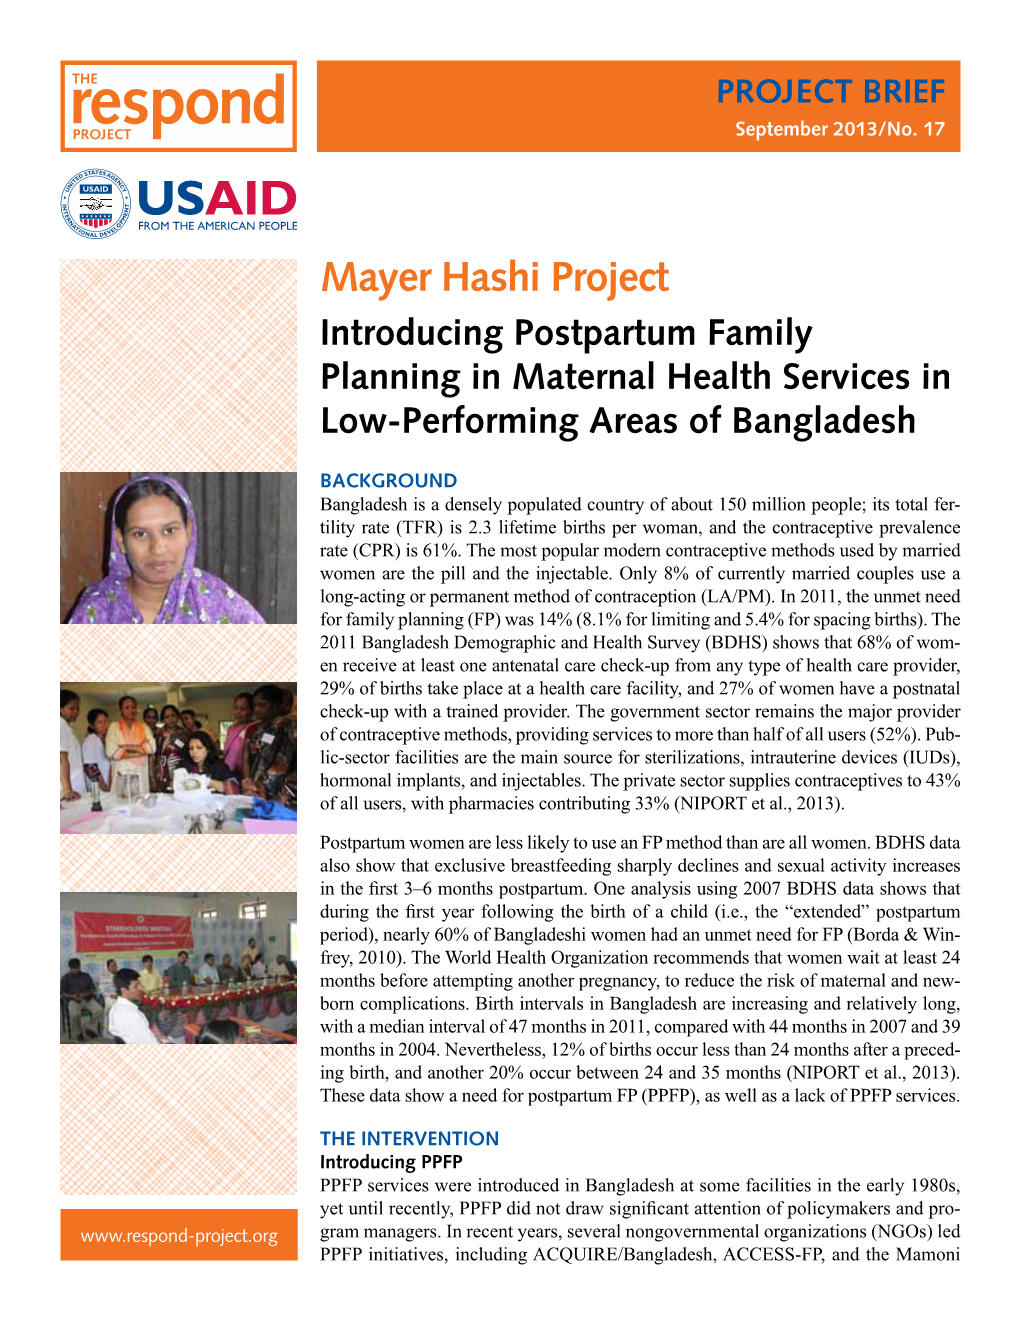 Mayer Hashi Project Introducing Postpartum Family Planning in Maternal Health Services in Low-Performing Areas of Bangladesh